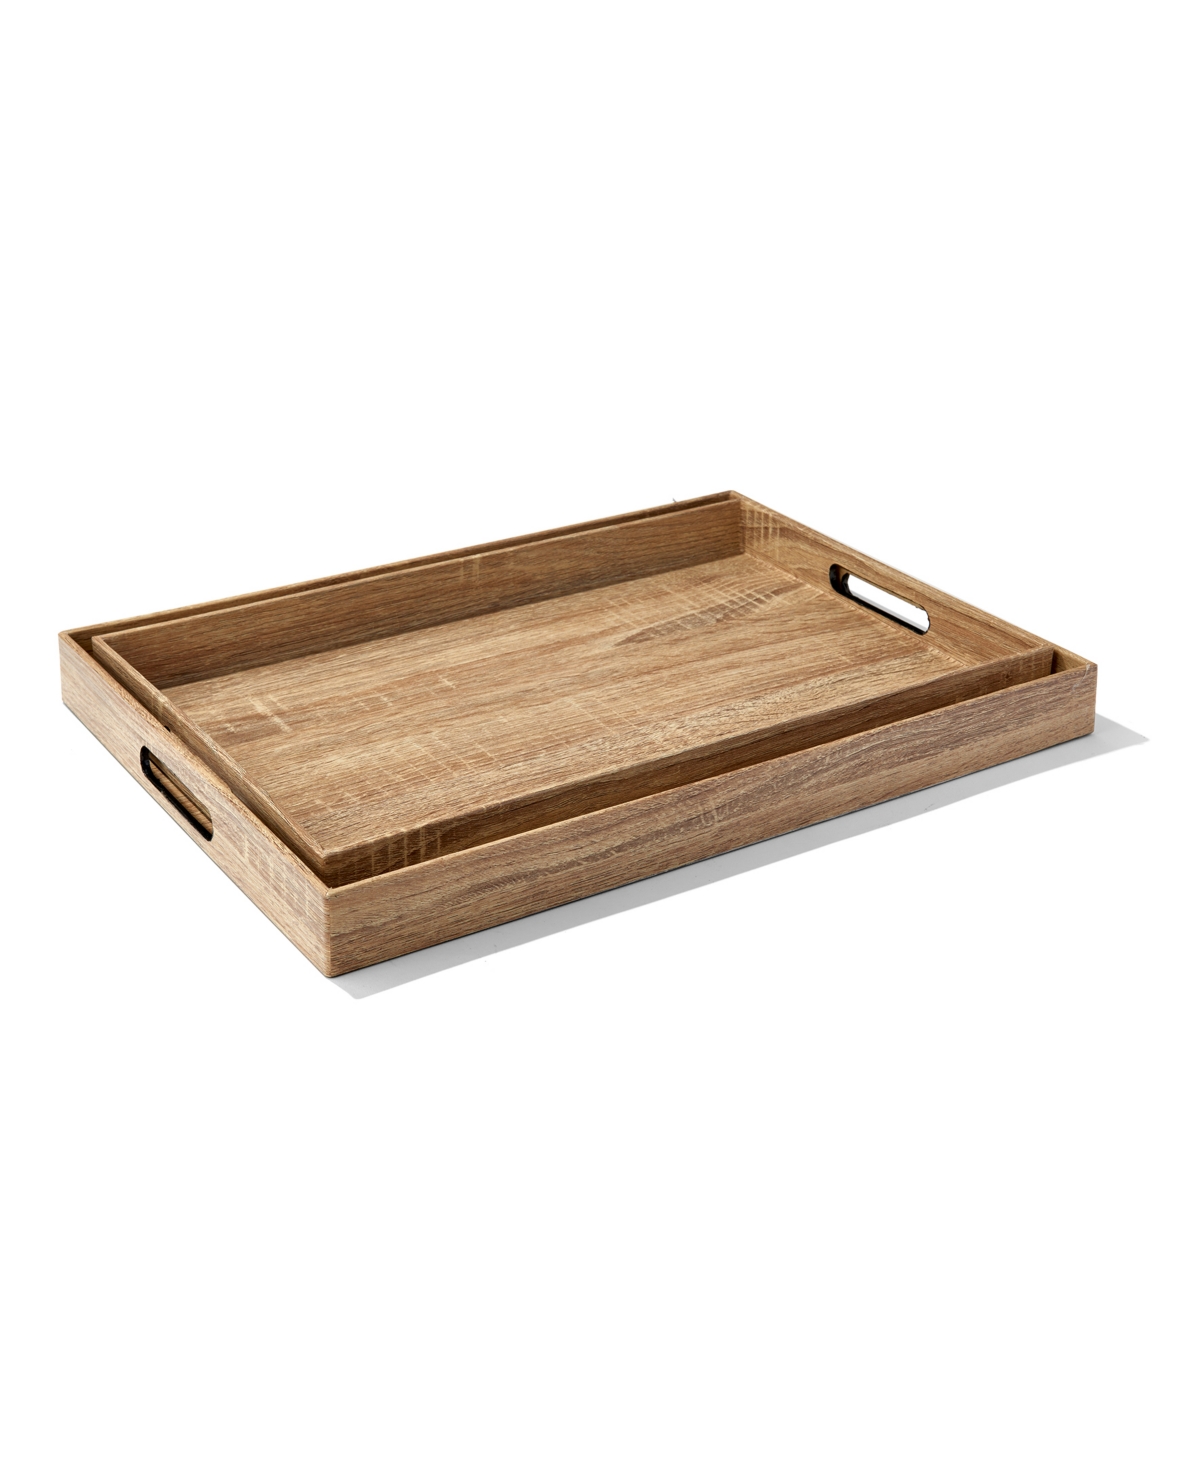 American Atelier Poplar Finished Trays Set, 2 Piece In Brown